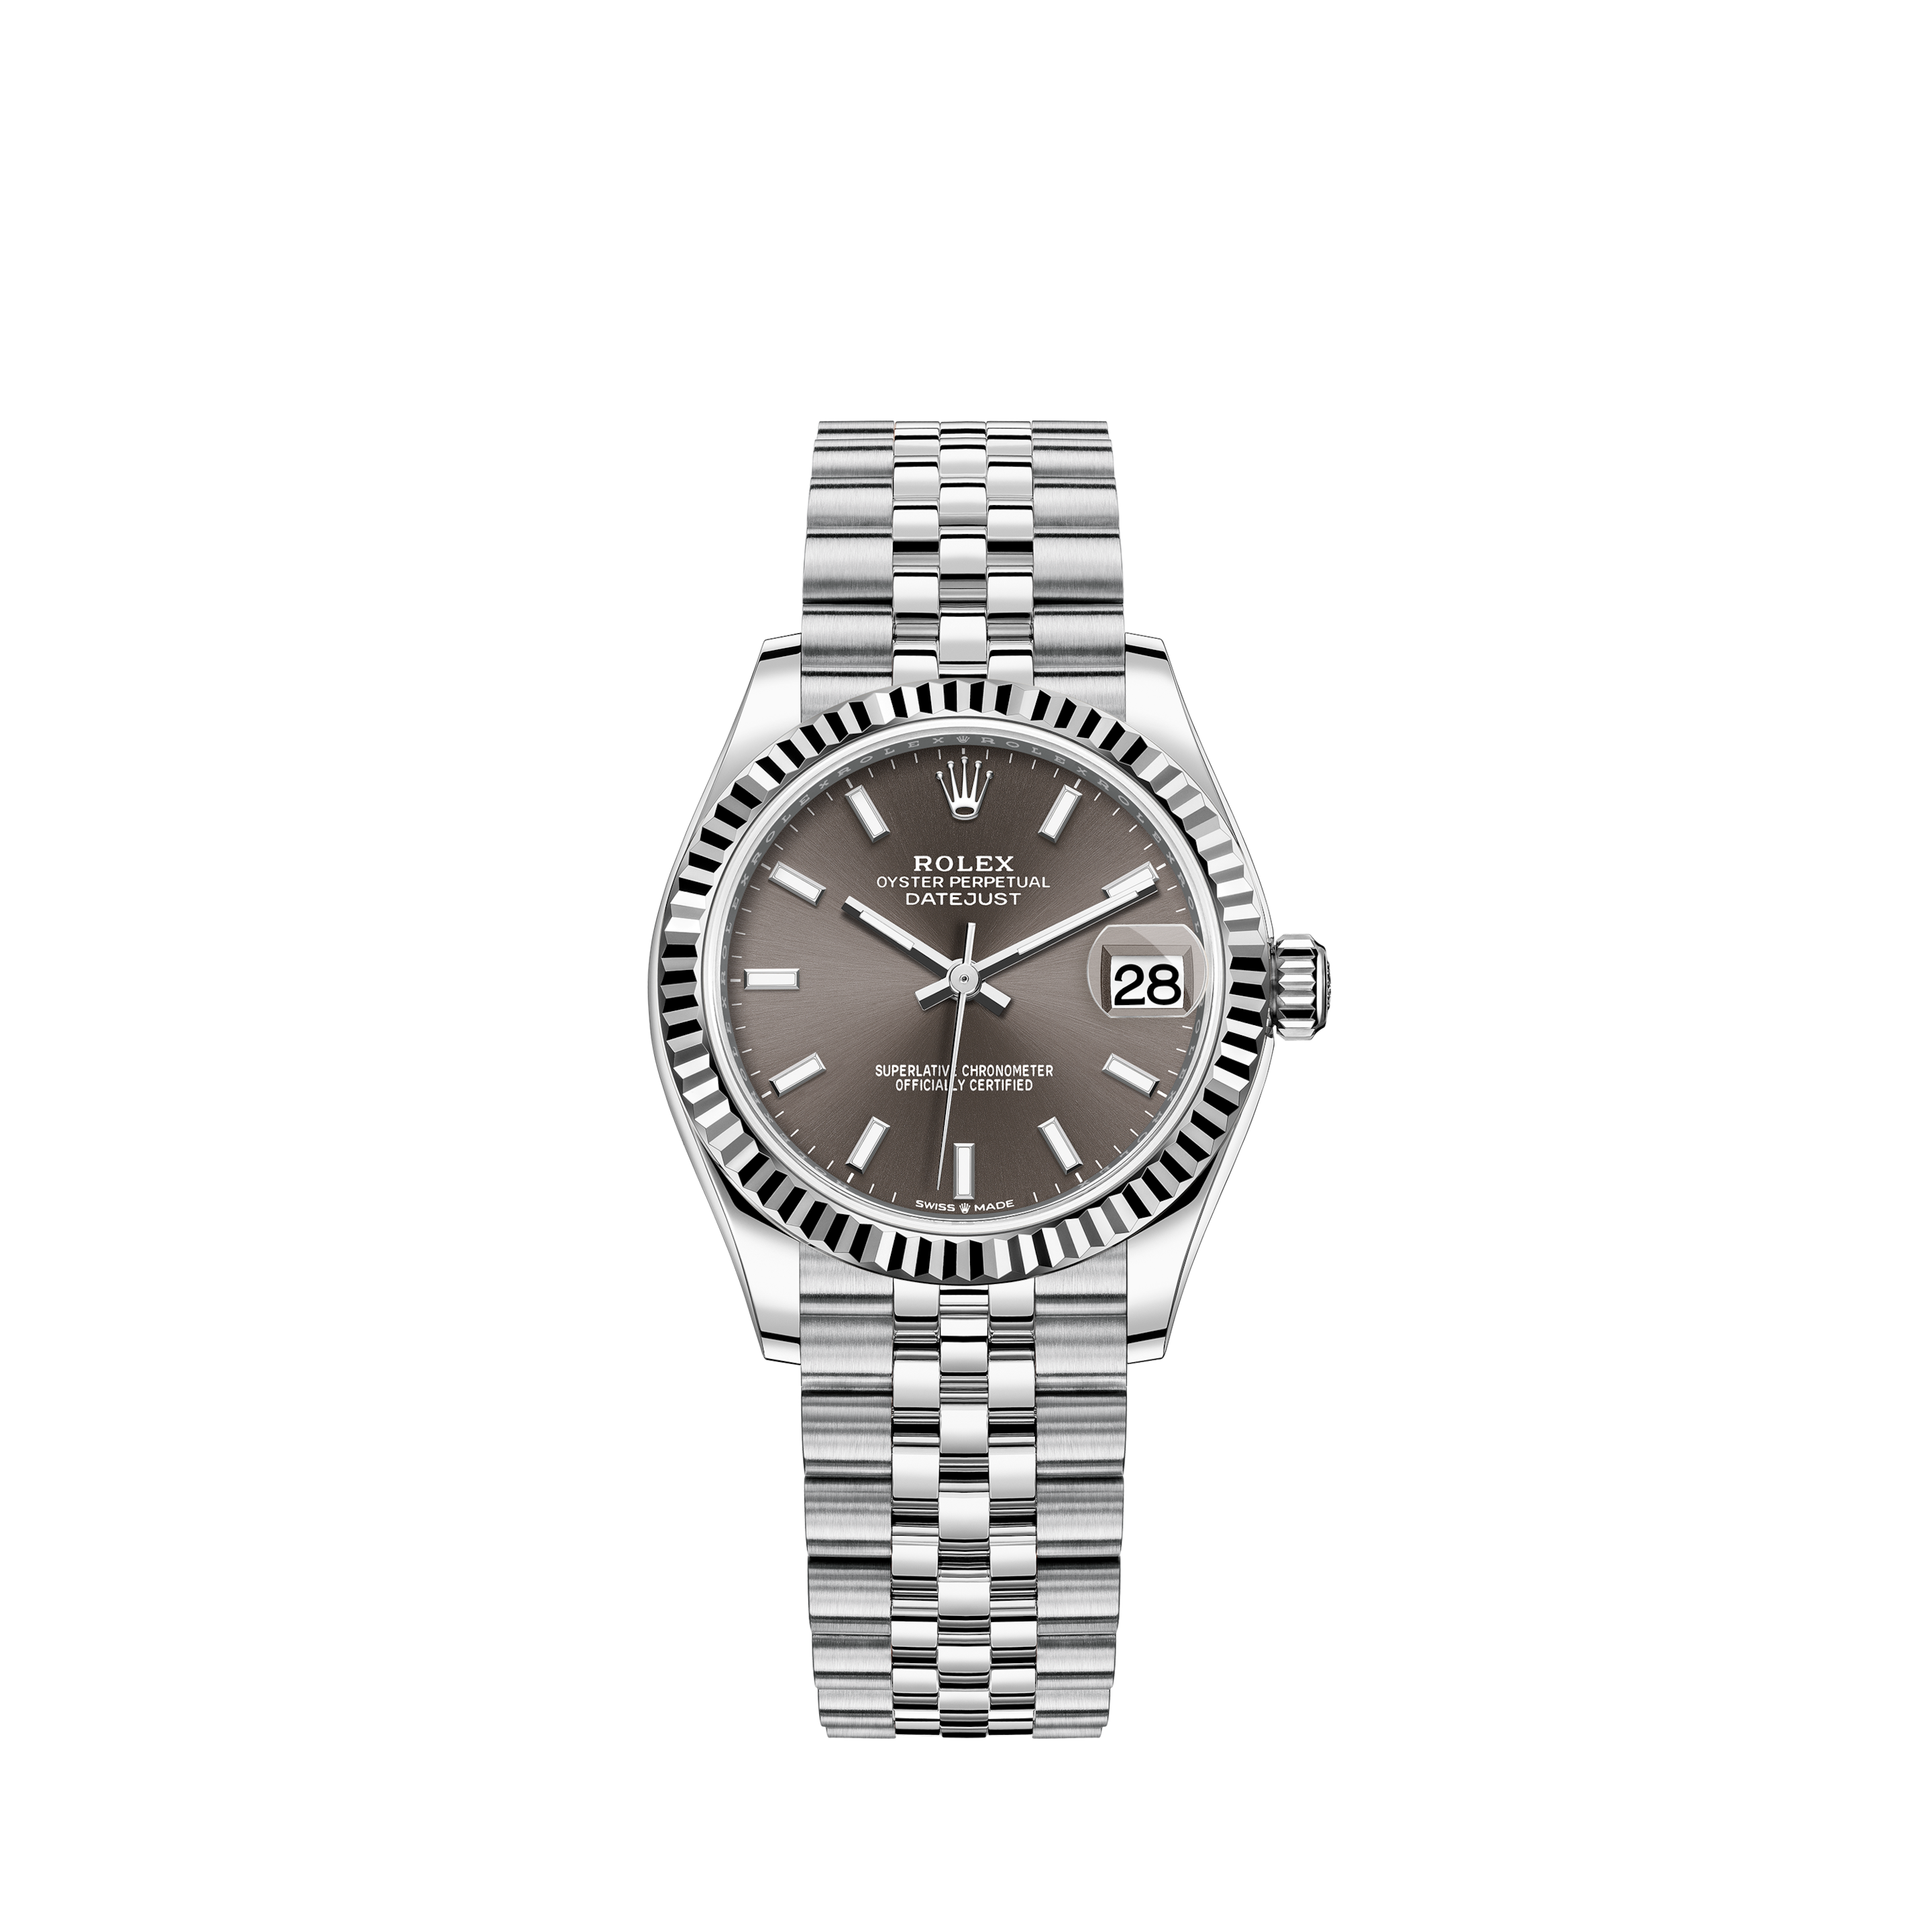 Rolex F (circa 2003-2004) Rolex Datejust 16234 Silver Dial Stainless Steel White Gold Automatic Men's OH Card [431]Rolex F Number 2004 Parallel Gala ROLEX Rolex Watch Seaduer 16600 Black Dial Luminova Luminous Date Display (2148103221361)[200]